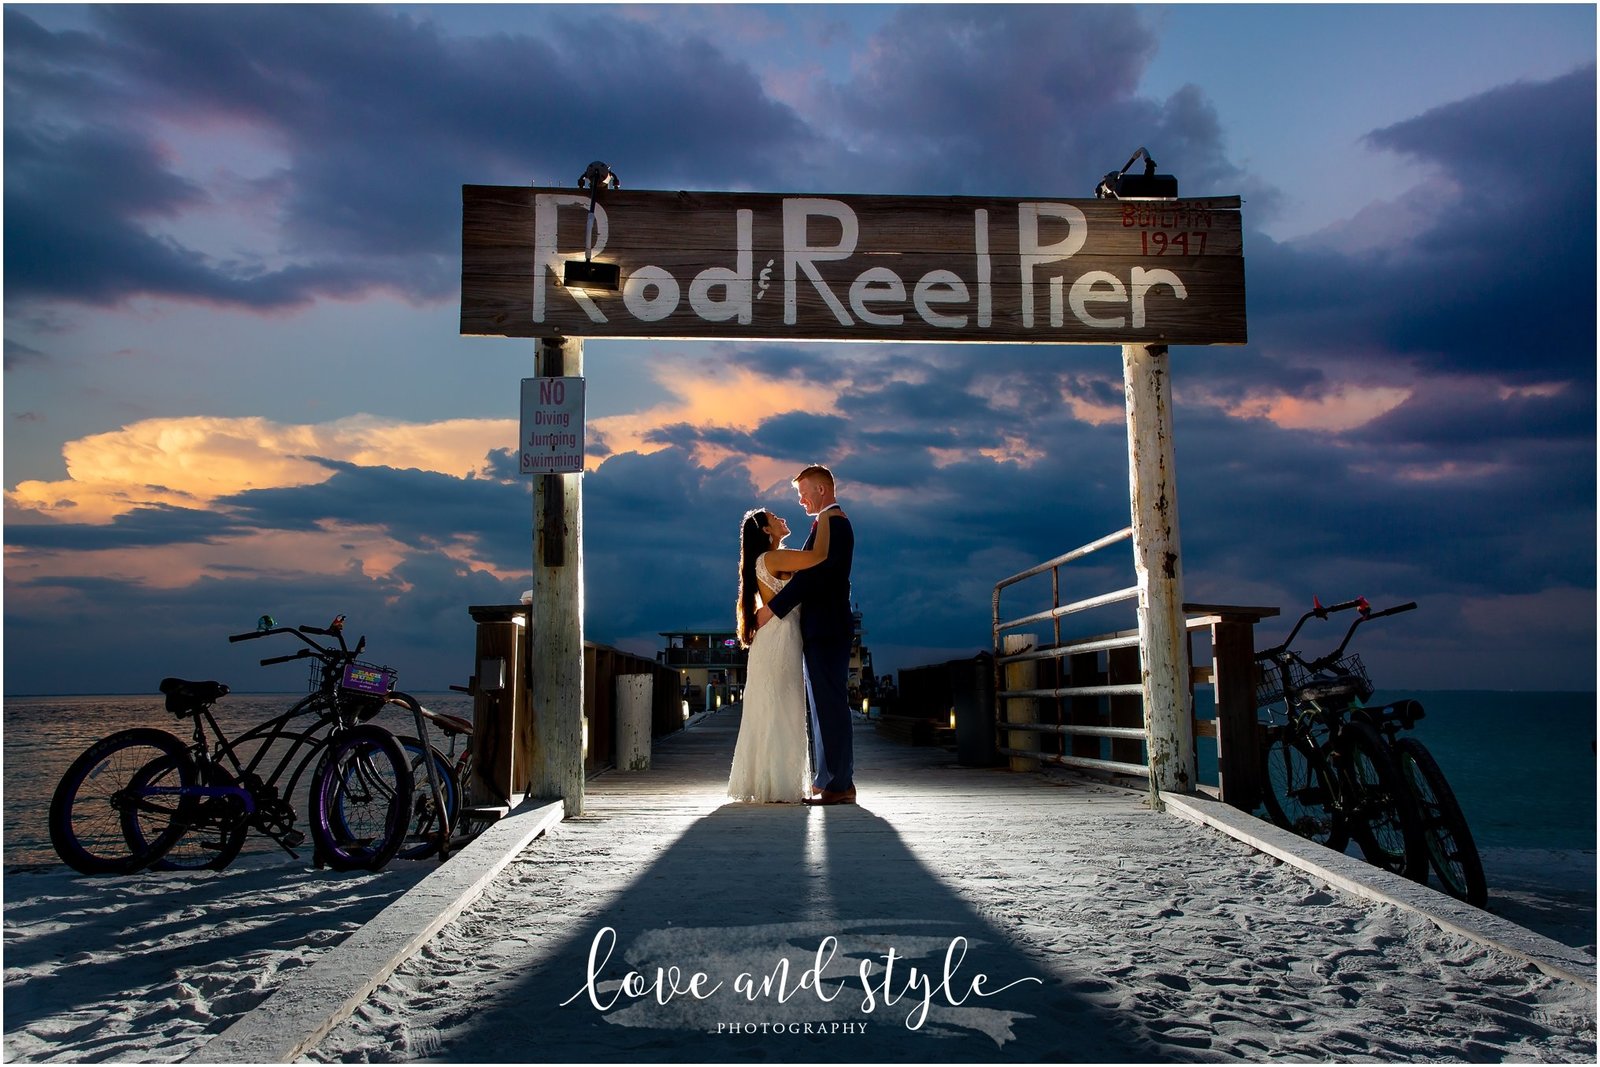 Rod and Reel Pier Wedding Photography of bride and groom with backlight at sunset